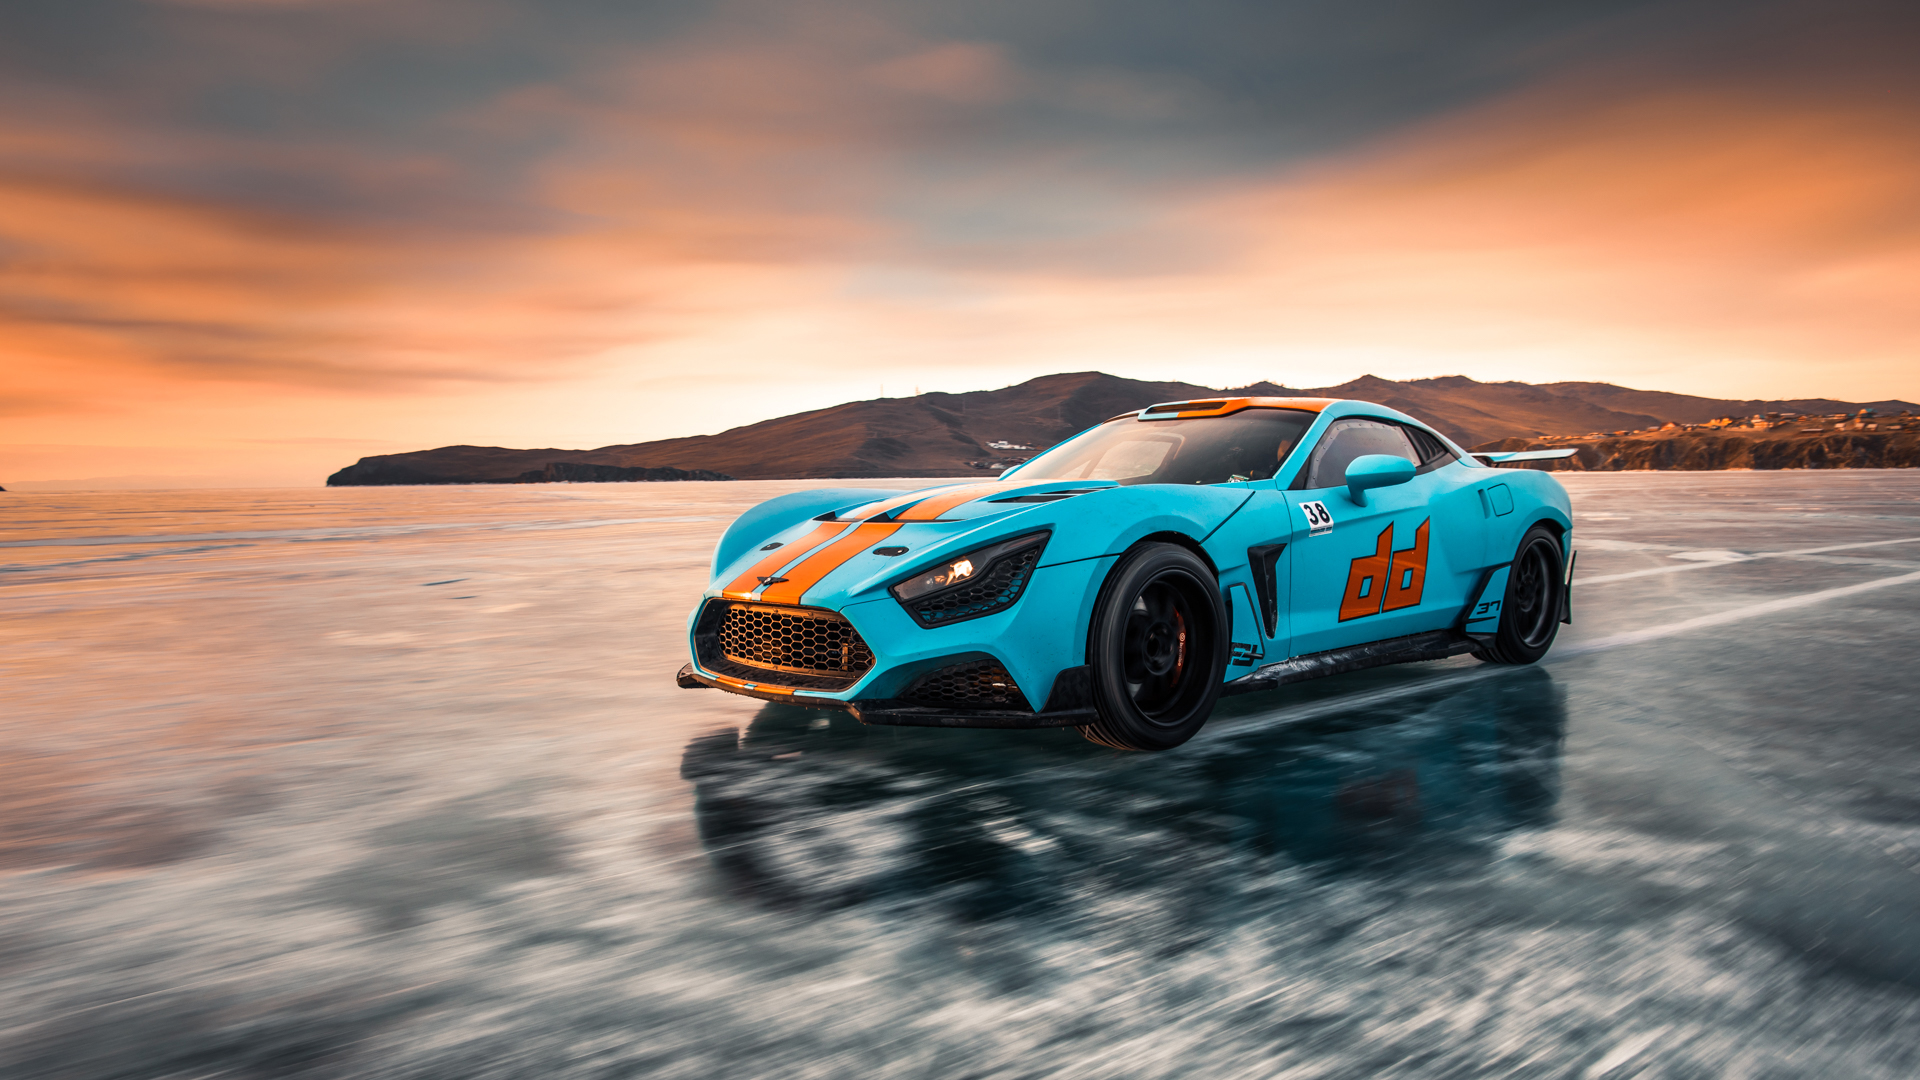 General 1920x1080 car drift cars Russian cars Lake Baikal ice sky Flanker F Russia frontal view sunset sunset glow clouds